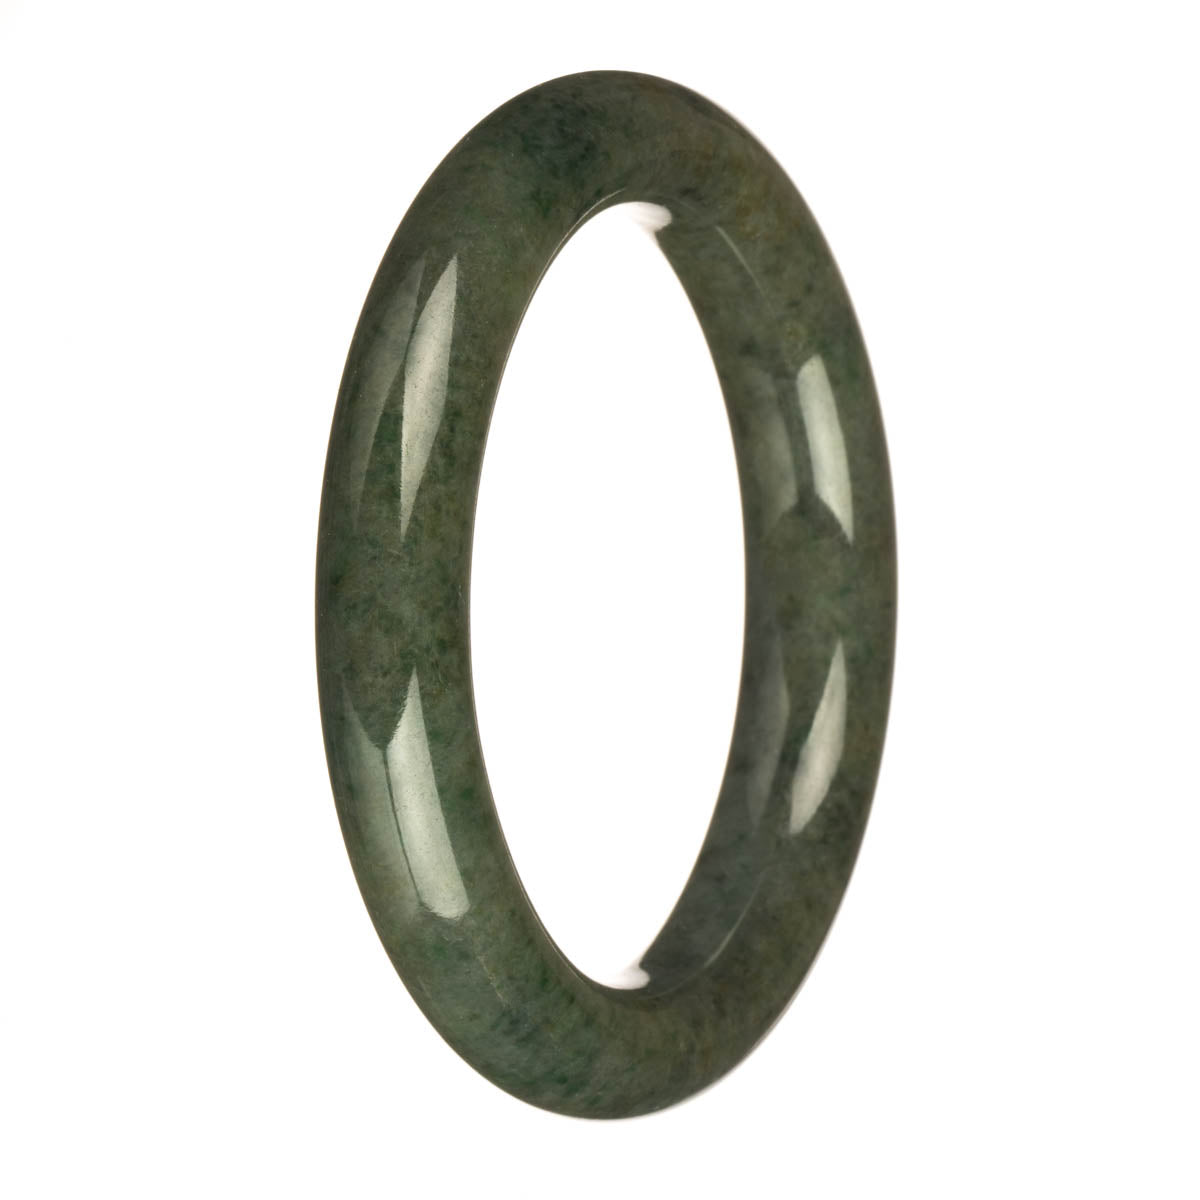 A close-up photograph of a round jadeite bangle with a diameter of 61mm. The bangle has a natural grey color with intricate apple green patterns swirling across its surface.